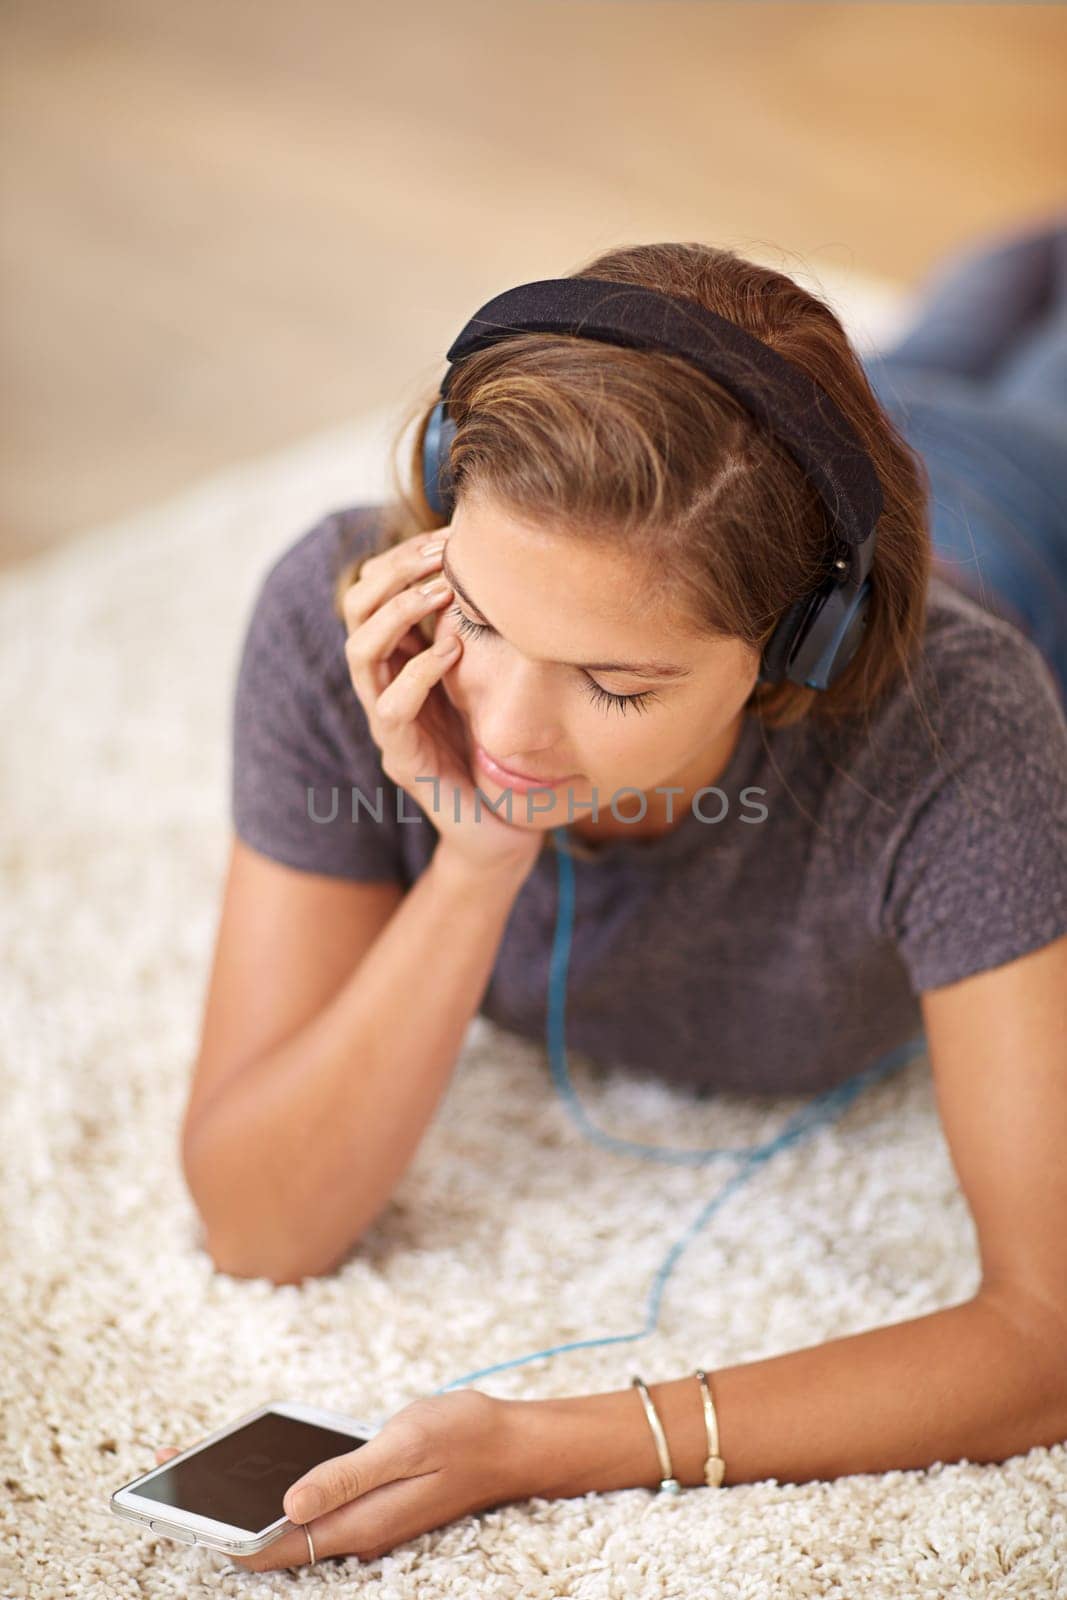 Carpet, headphones or woman with phone for music streaming, subscription or wellness in home. Smile, girl or female person listening to audio, track or song to relax on floor on mobile app for peace by YuriArcurs